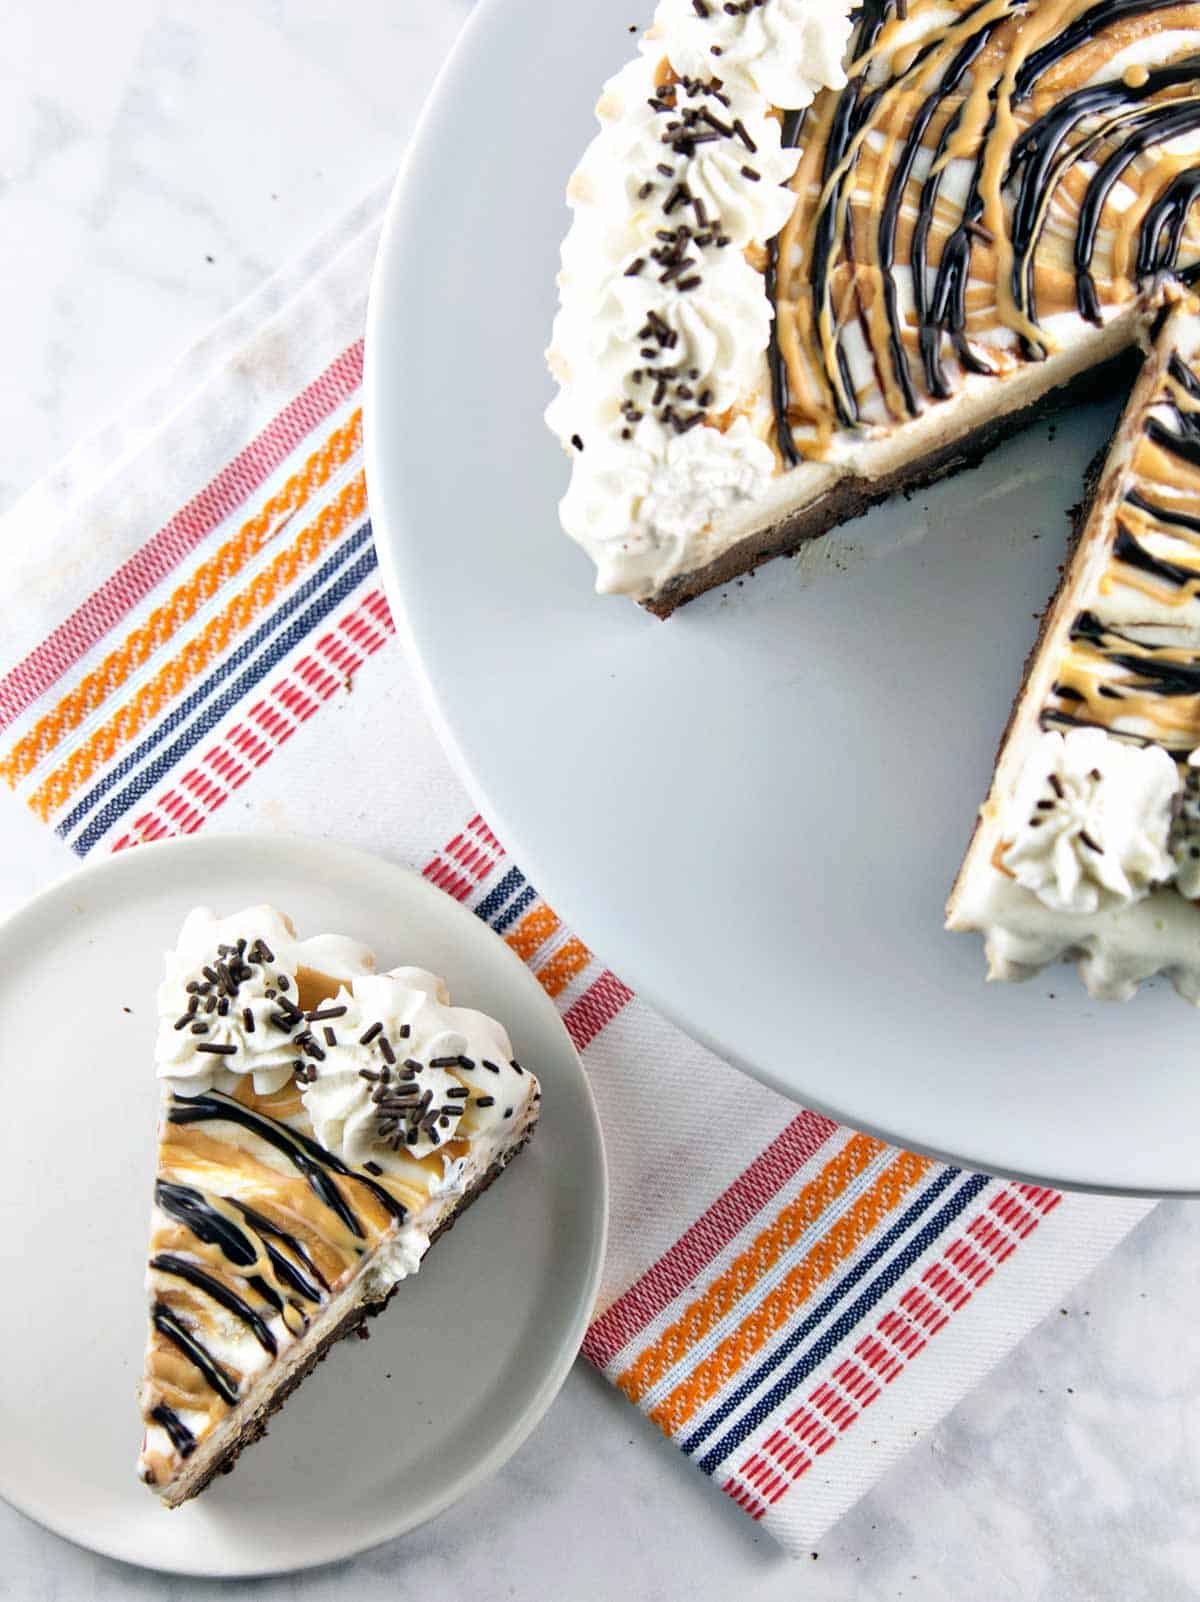 Brownie Bottom Peanut Butter Ice Cream Pie: Why choose between brownies and ice cream when you can make one show-stopping dessert with both? Grab a fork (or spoon) and dig on in! #bunsenburnerbakery #icecream #brownies #icecreampie #icecreamcake